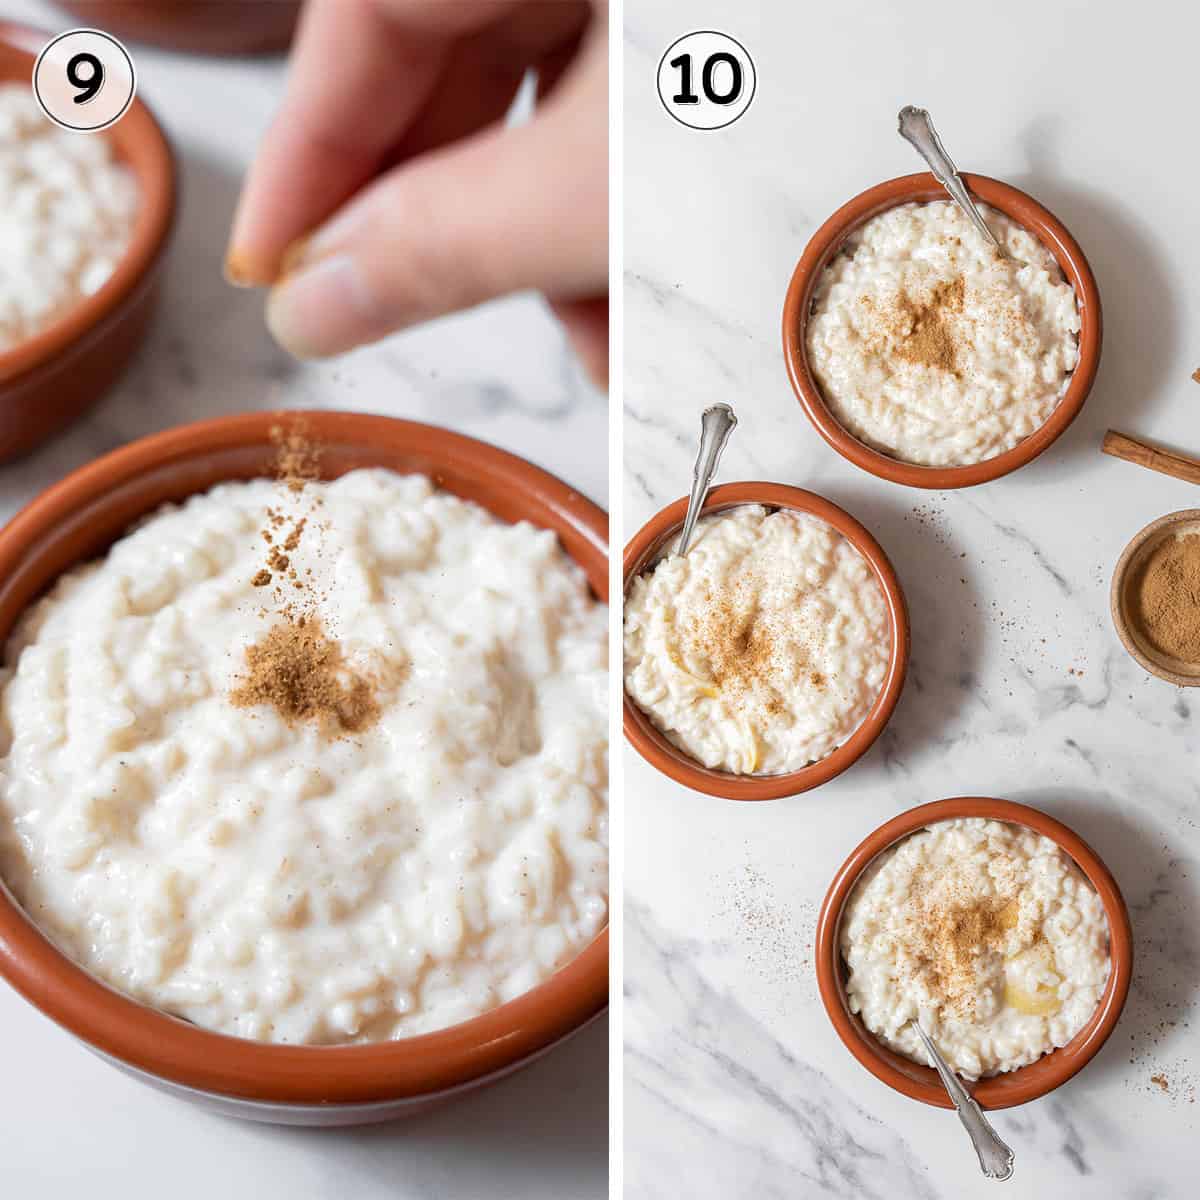 garnishing arroz con leche with cinnamon and serving in three small bowls.